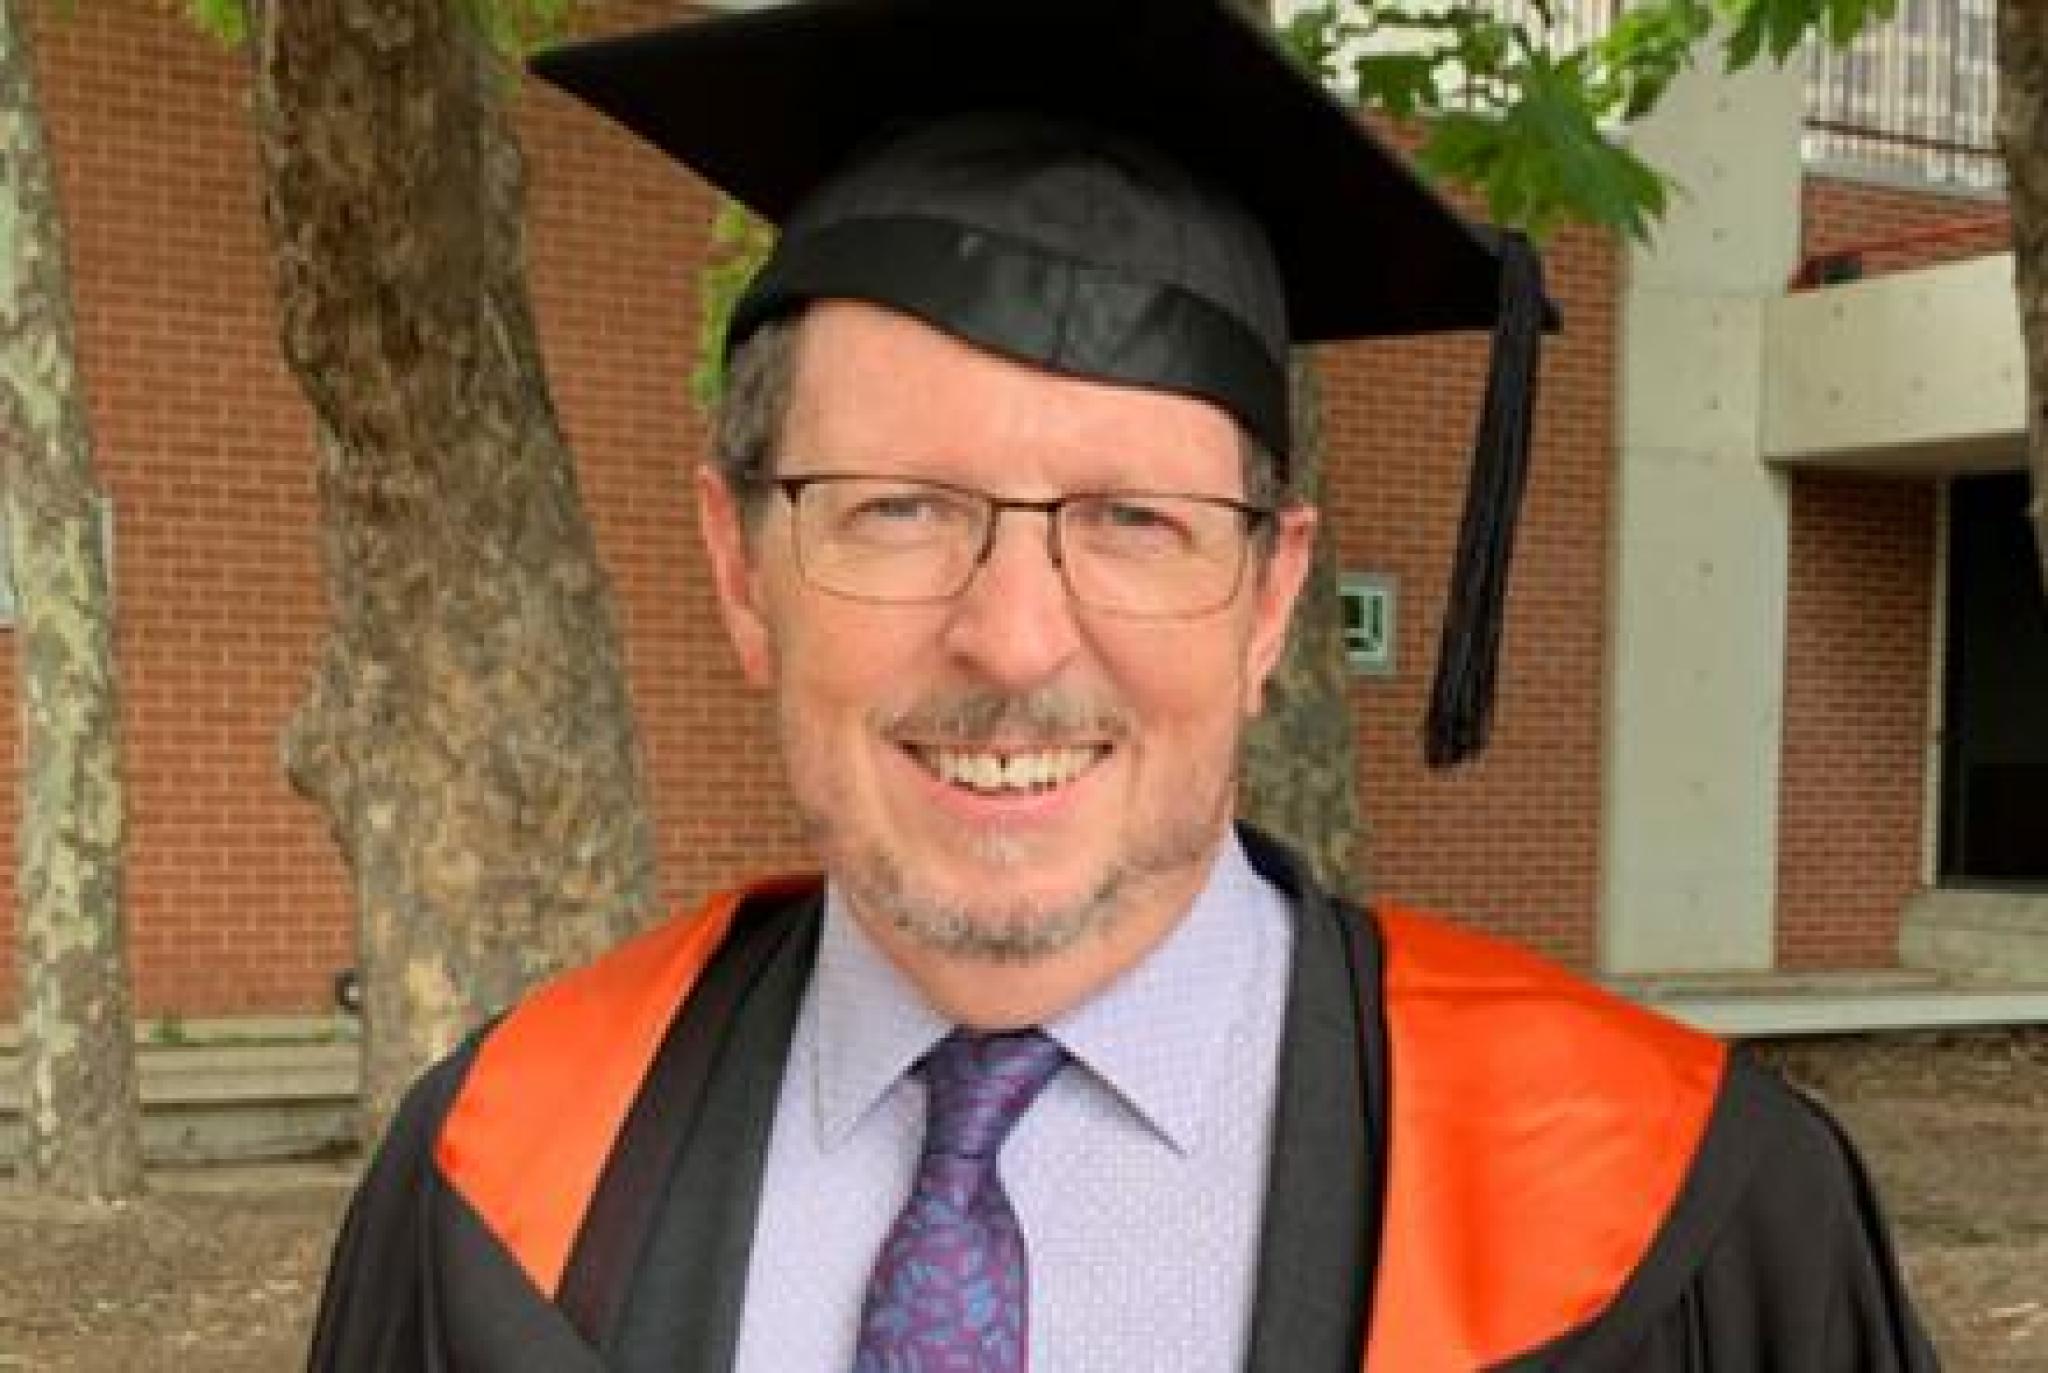 Michael Stone after December 2019 Conferring of Awards Ceremony. Image by Michael Stone